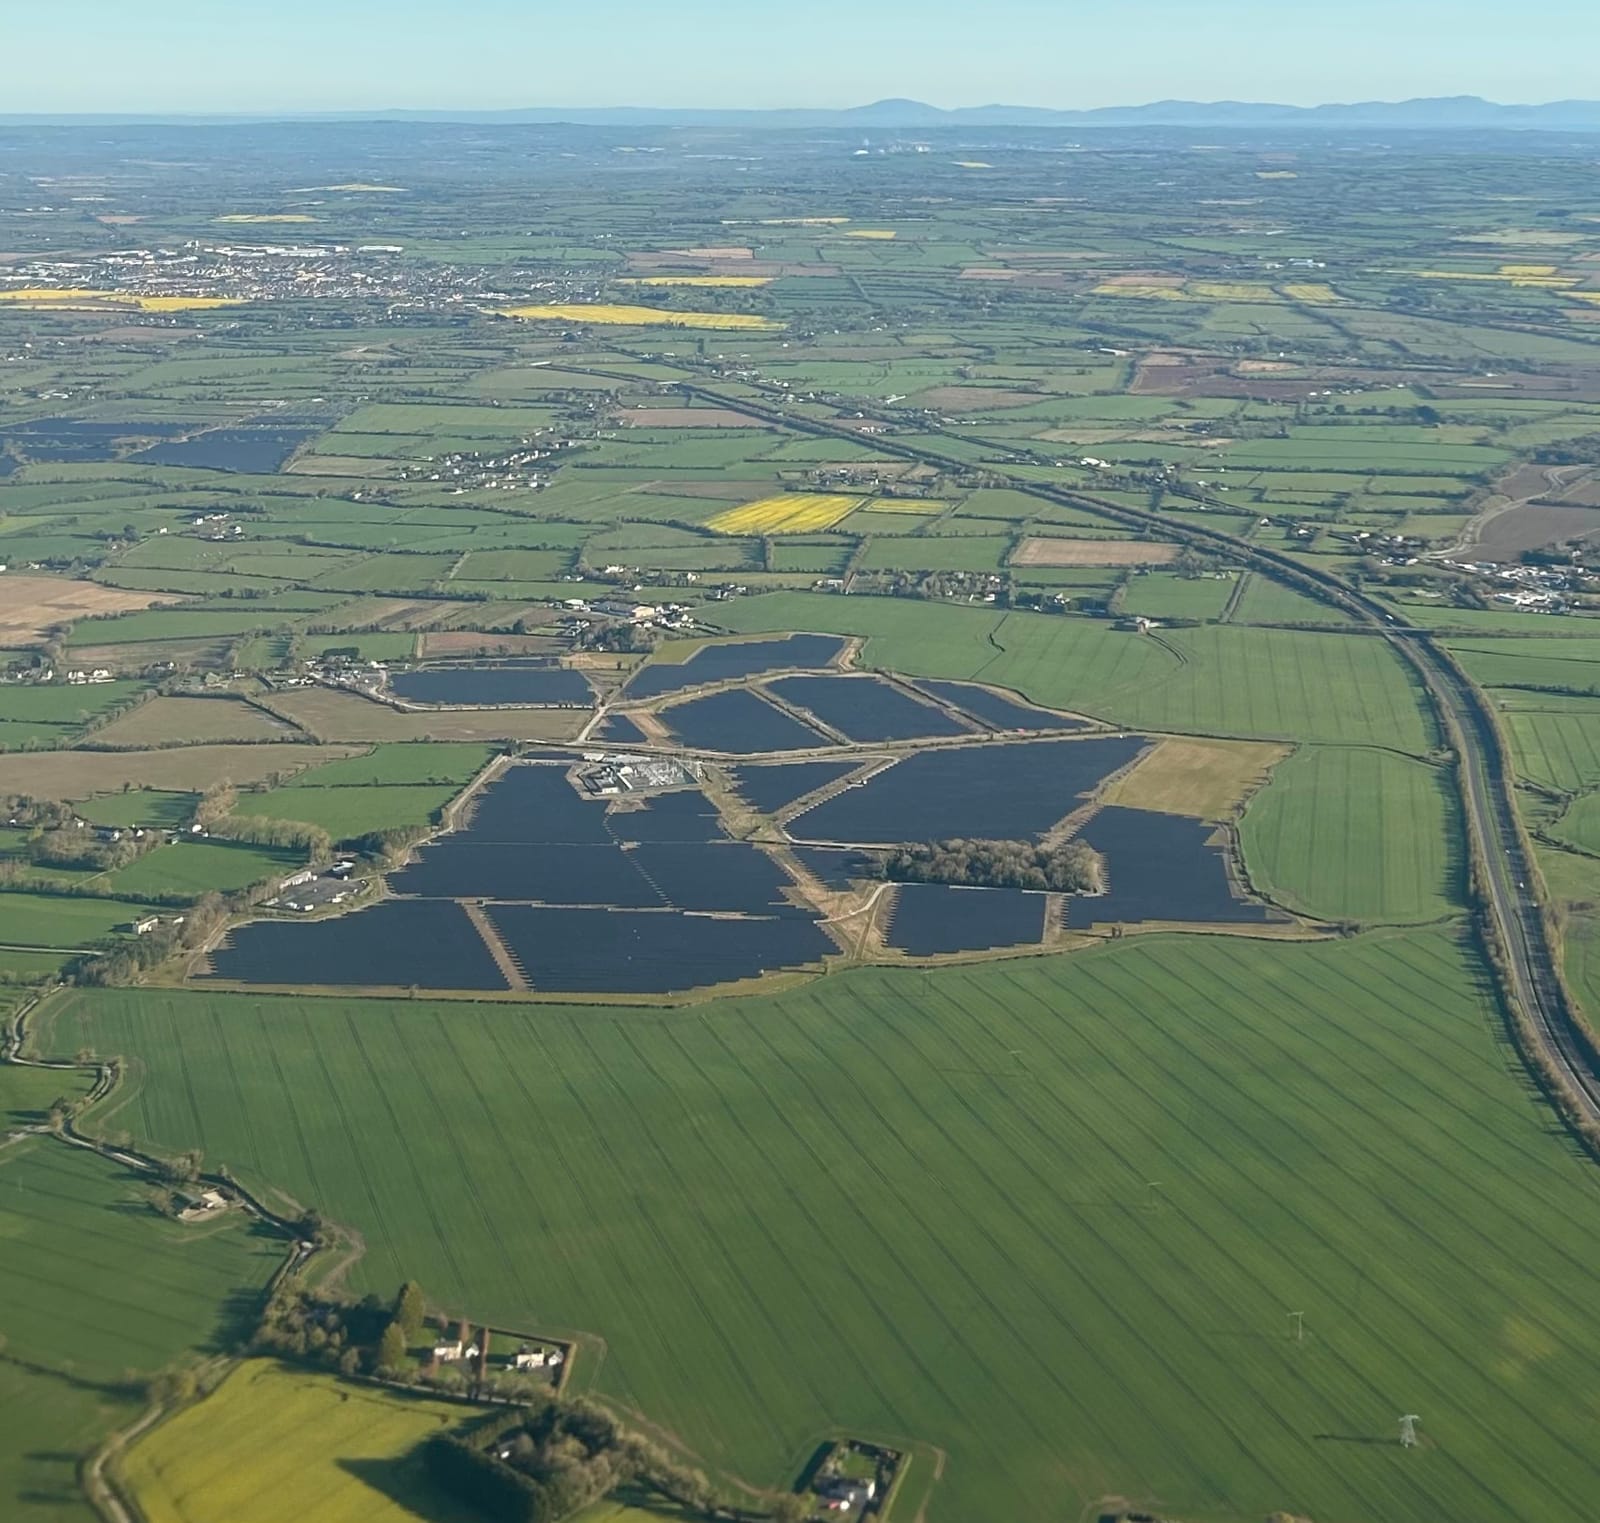 Archaeological investigations for Solar Farms - a guide to best practice.